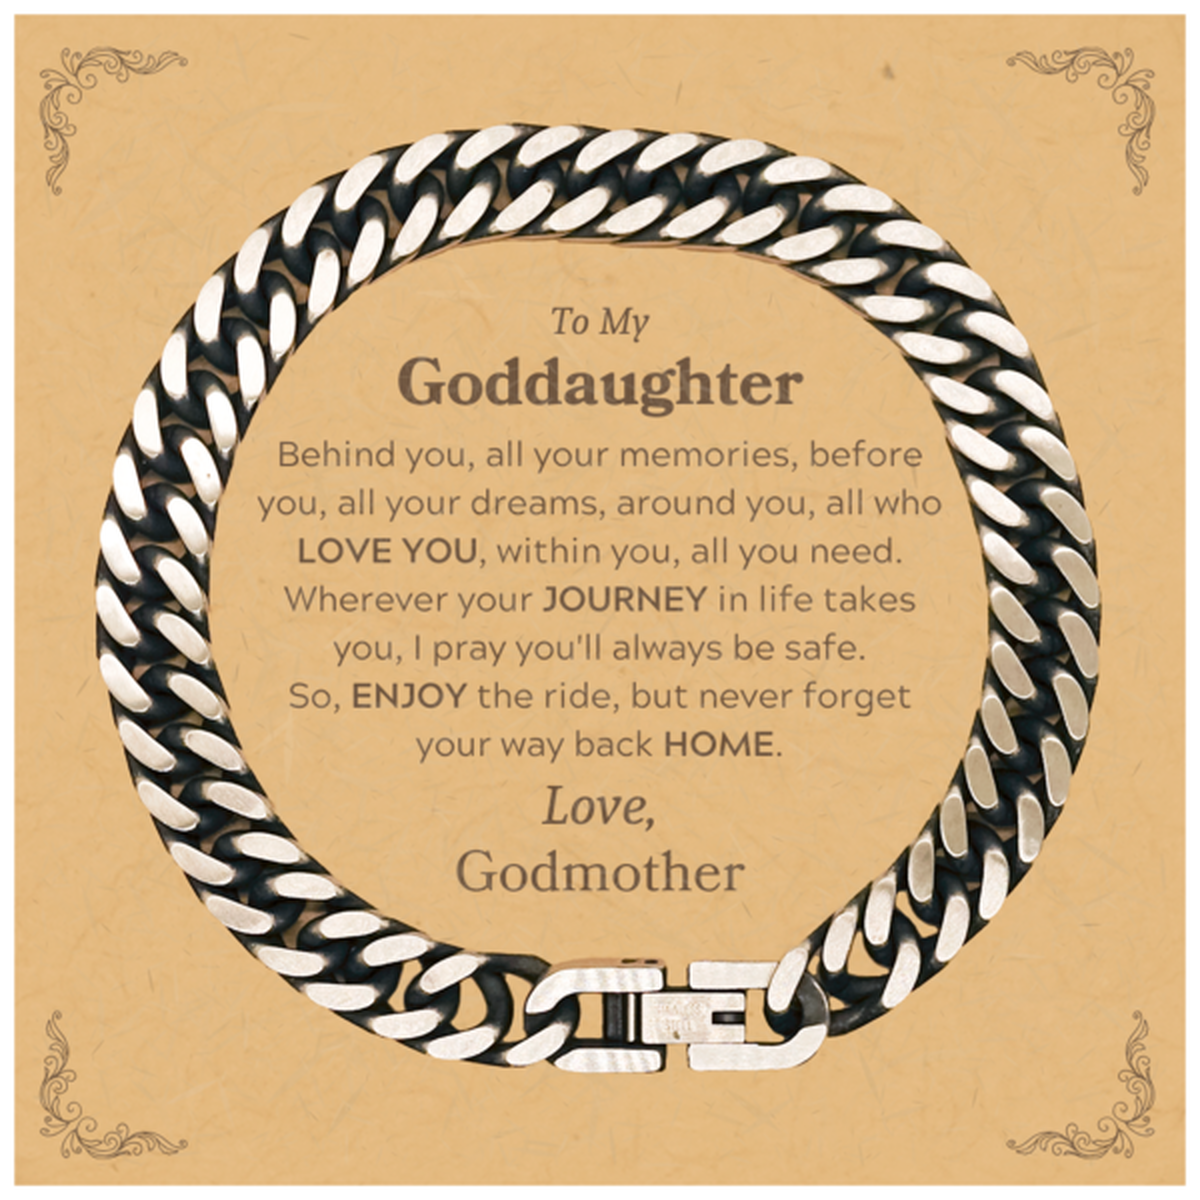 To My Goddaughter Graduation Gifts from Godmother, Goddaughter Cuban Link Chain Bracelet Christmas Birthday Gifts for Goddaughter Behind you, all your memories, before you, all your dreams. Love, Godmother